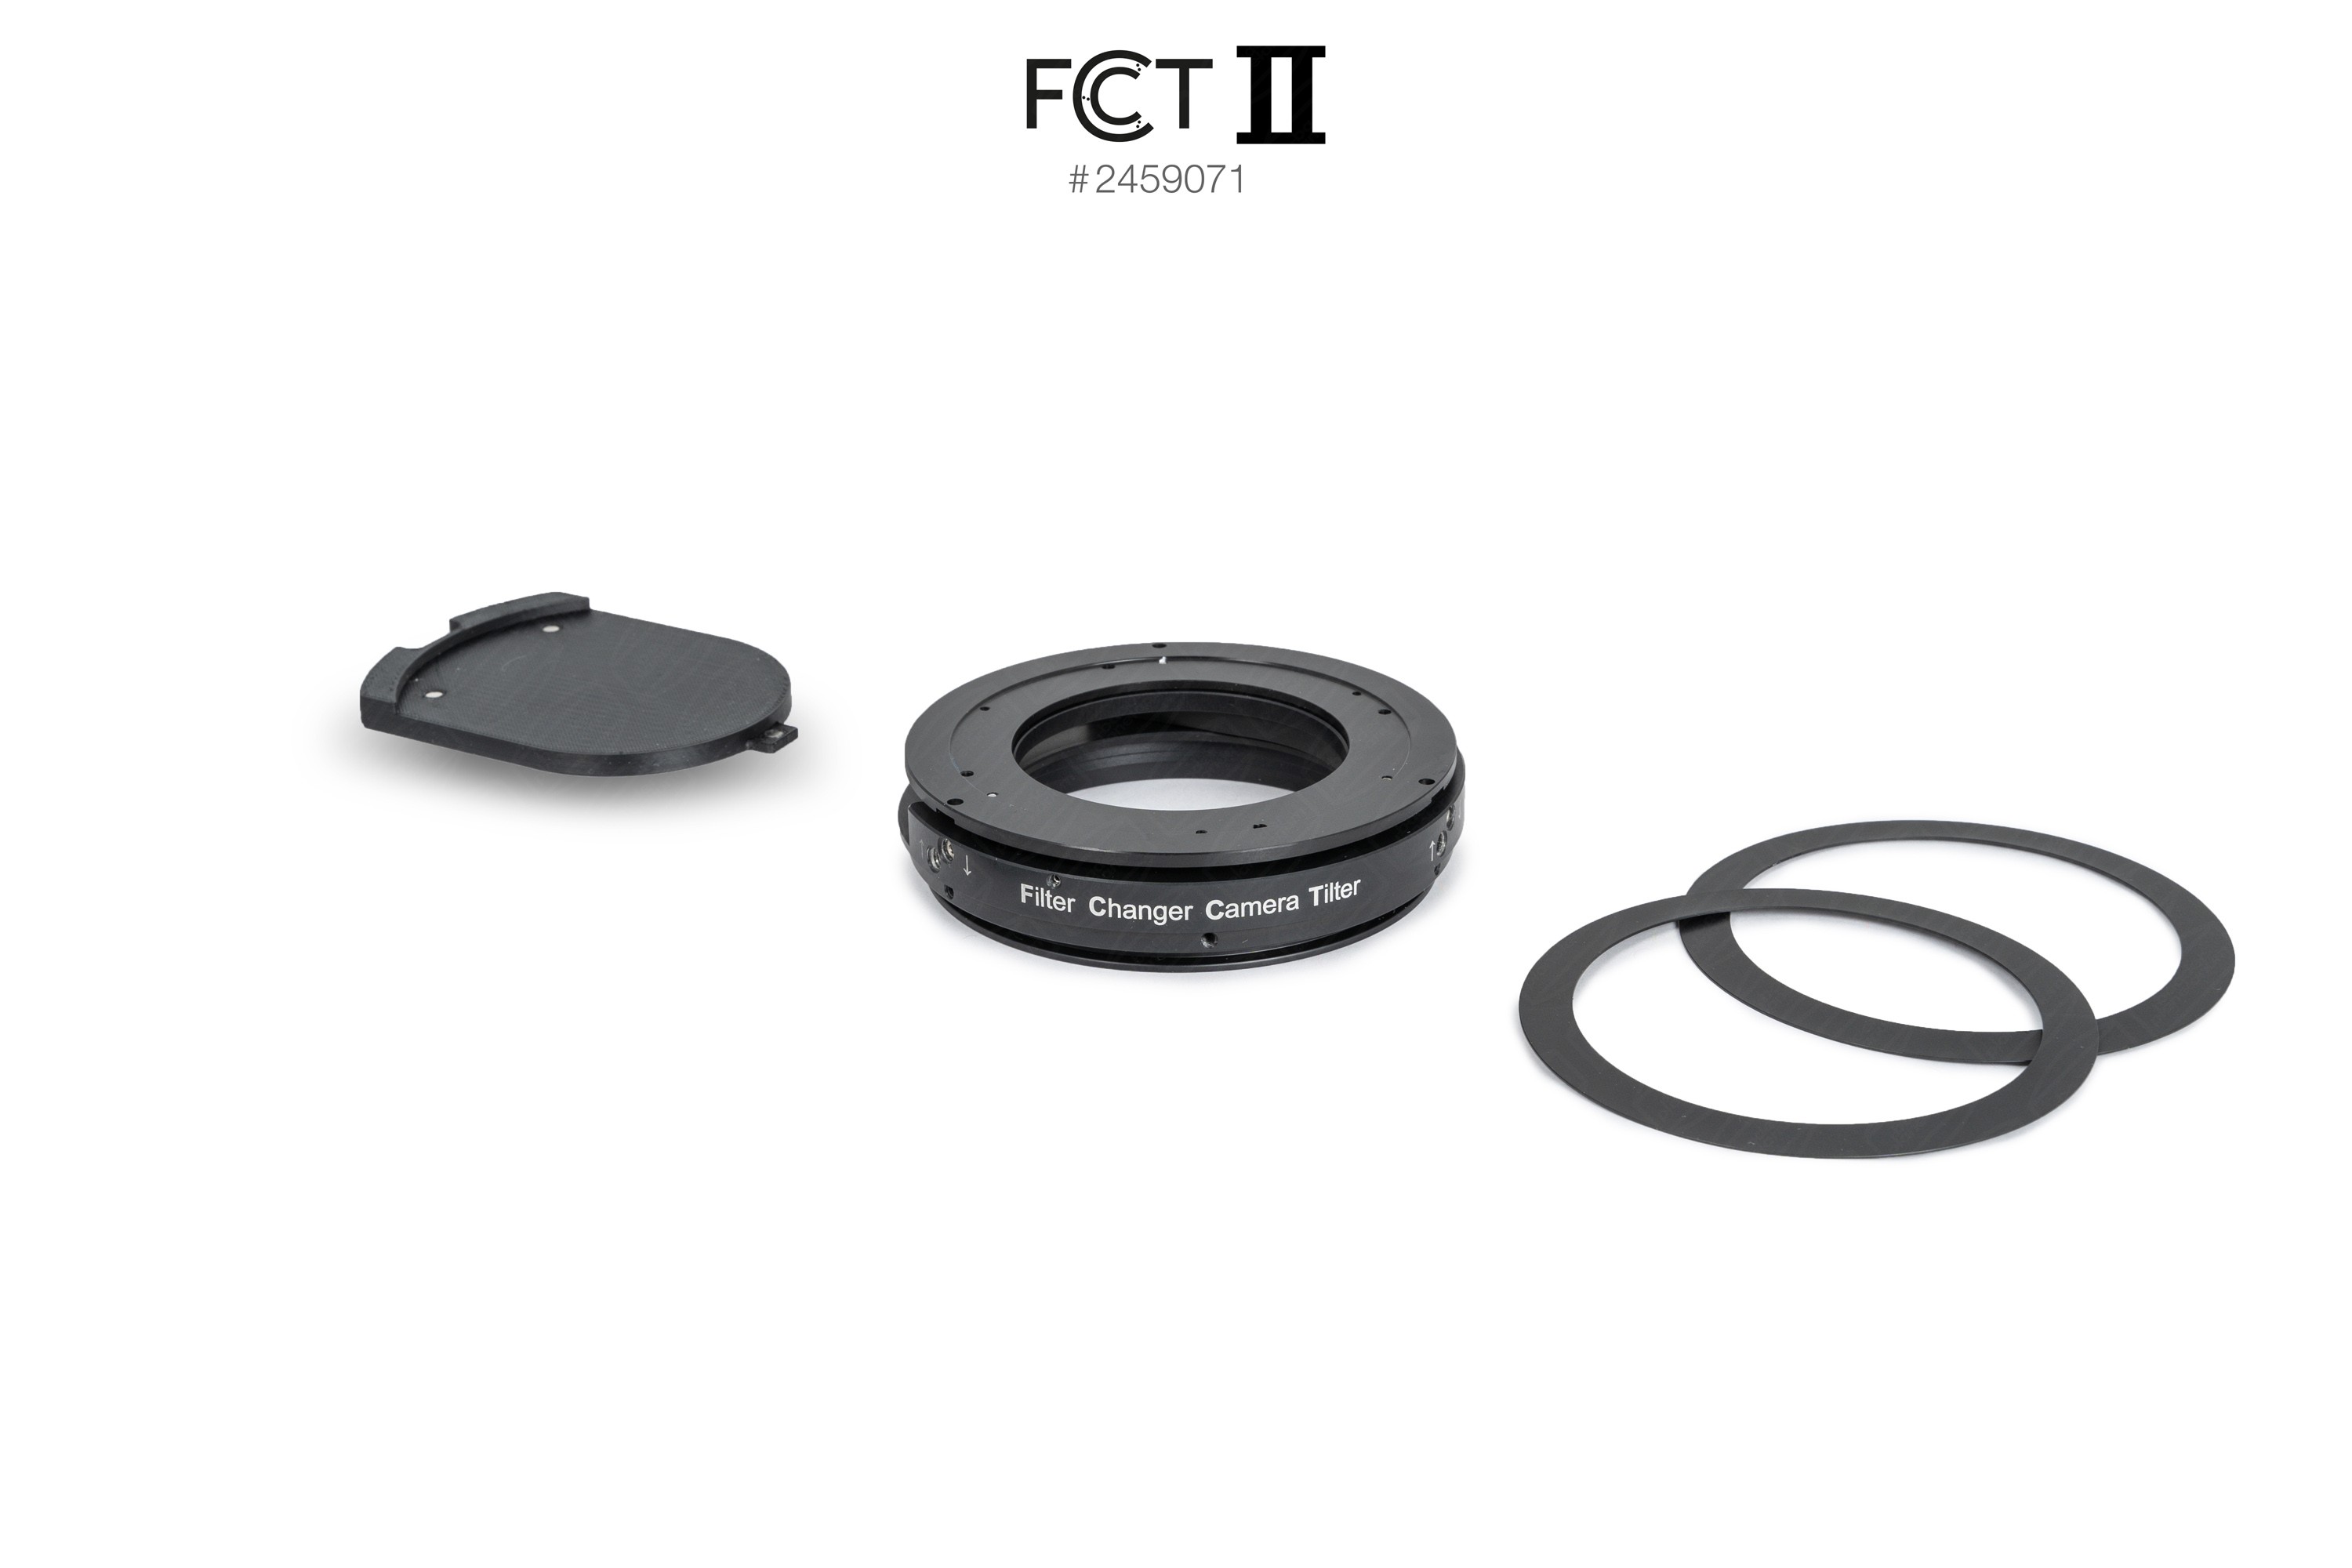 Baader FCCT II for RASA 8" – suitable for Ø 90 mm QHY-Cameras (e.g. QHY 268 / 294 / 533)